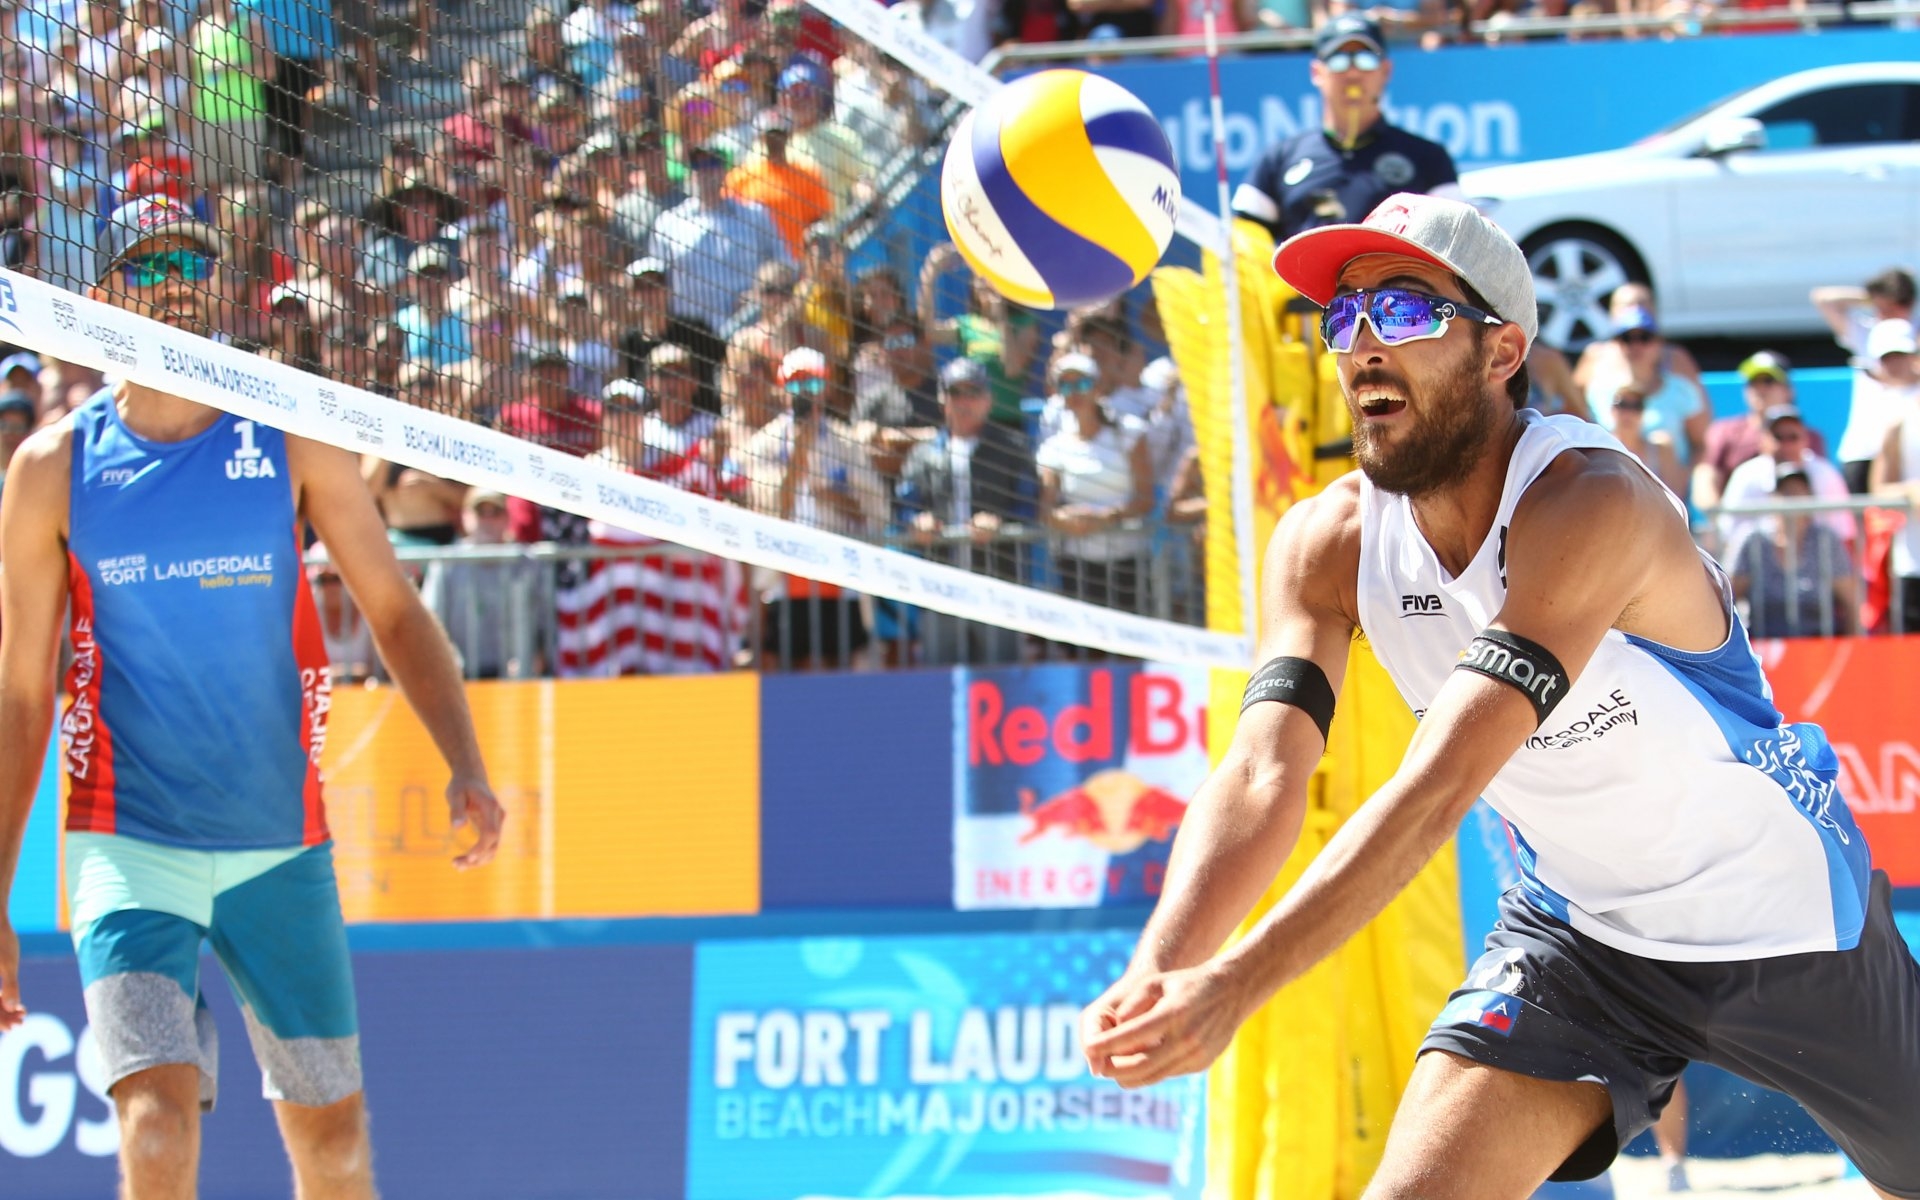 Daniele Lupo was pleased about the silver medal in Fort Lauderdale (Photocredit: FIVB)